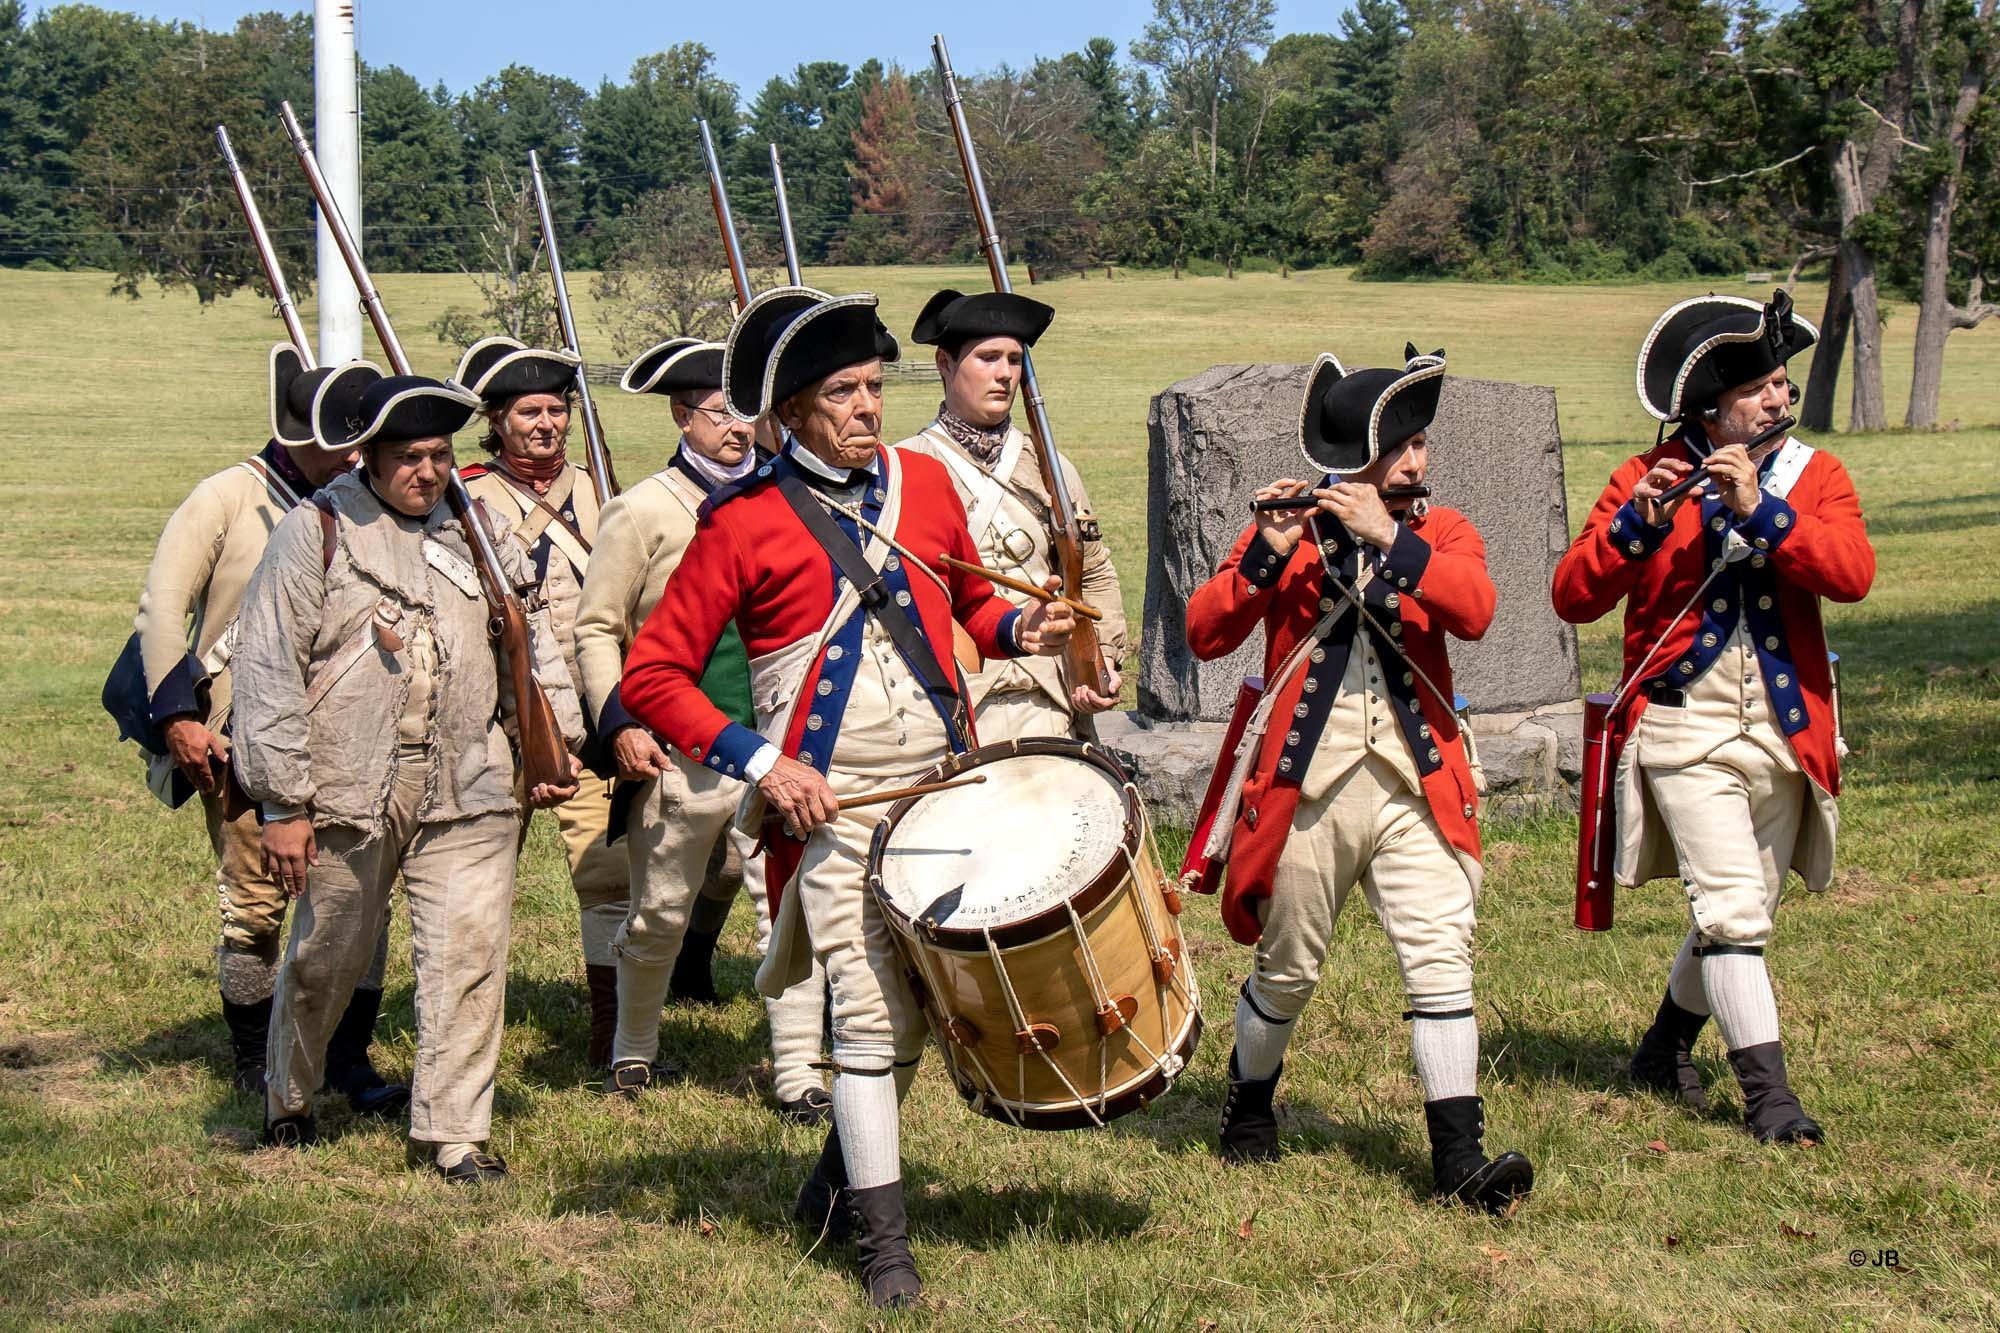 Marching On with the 1st NJ Regiment